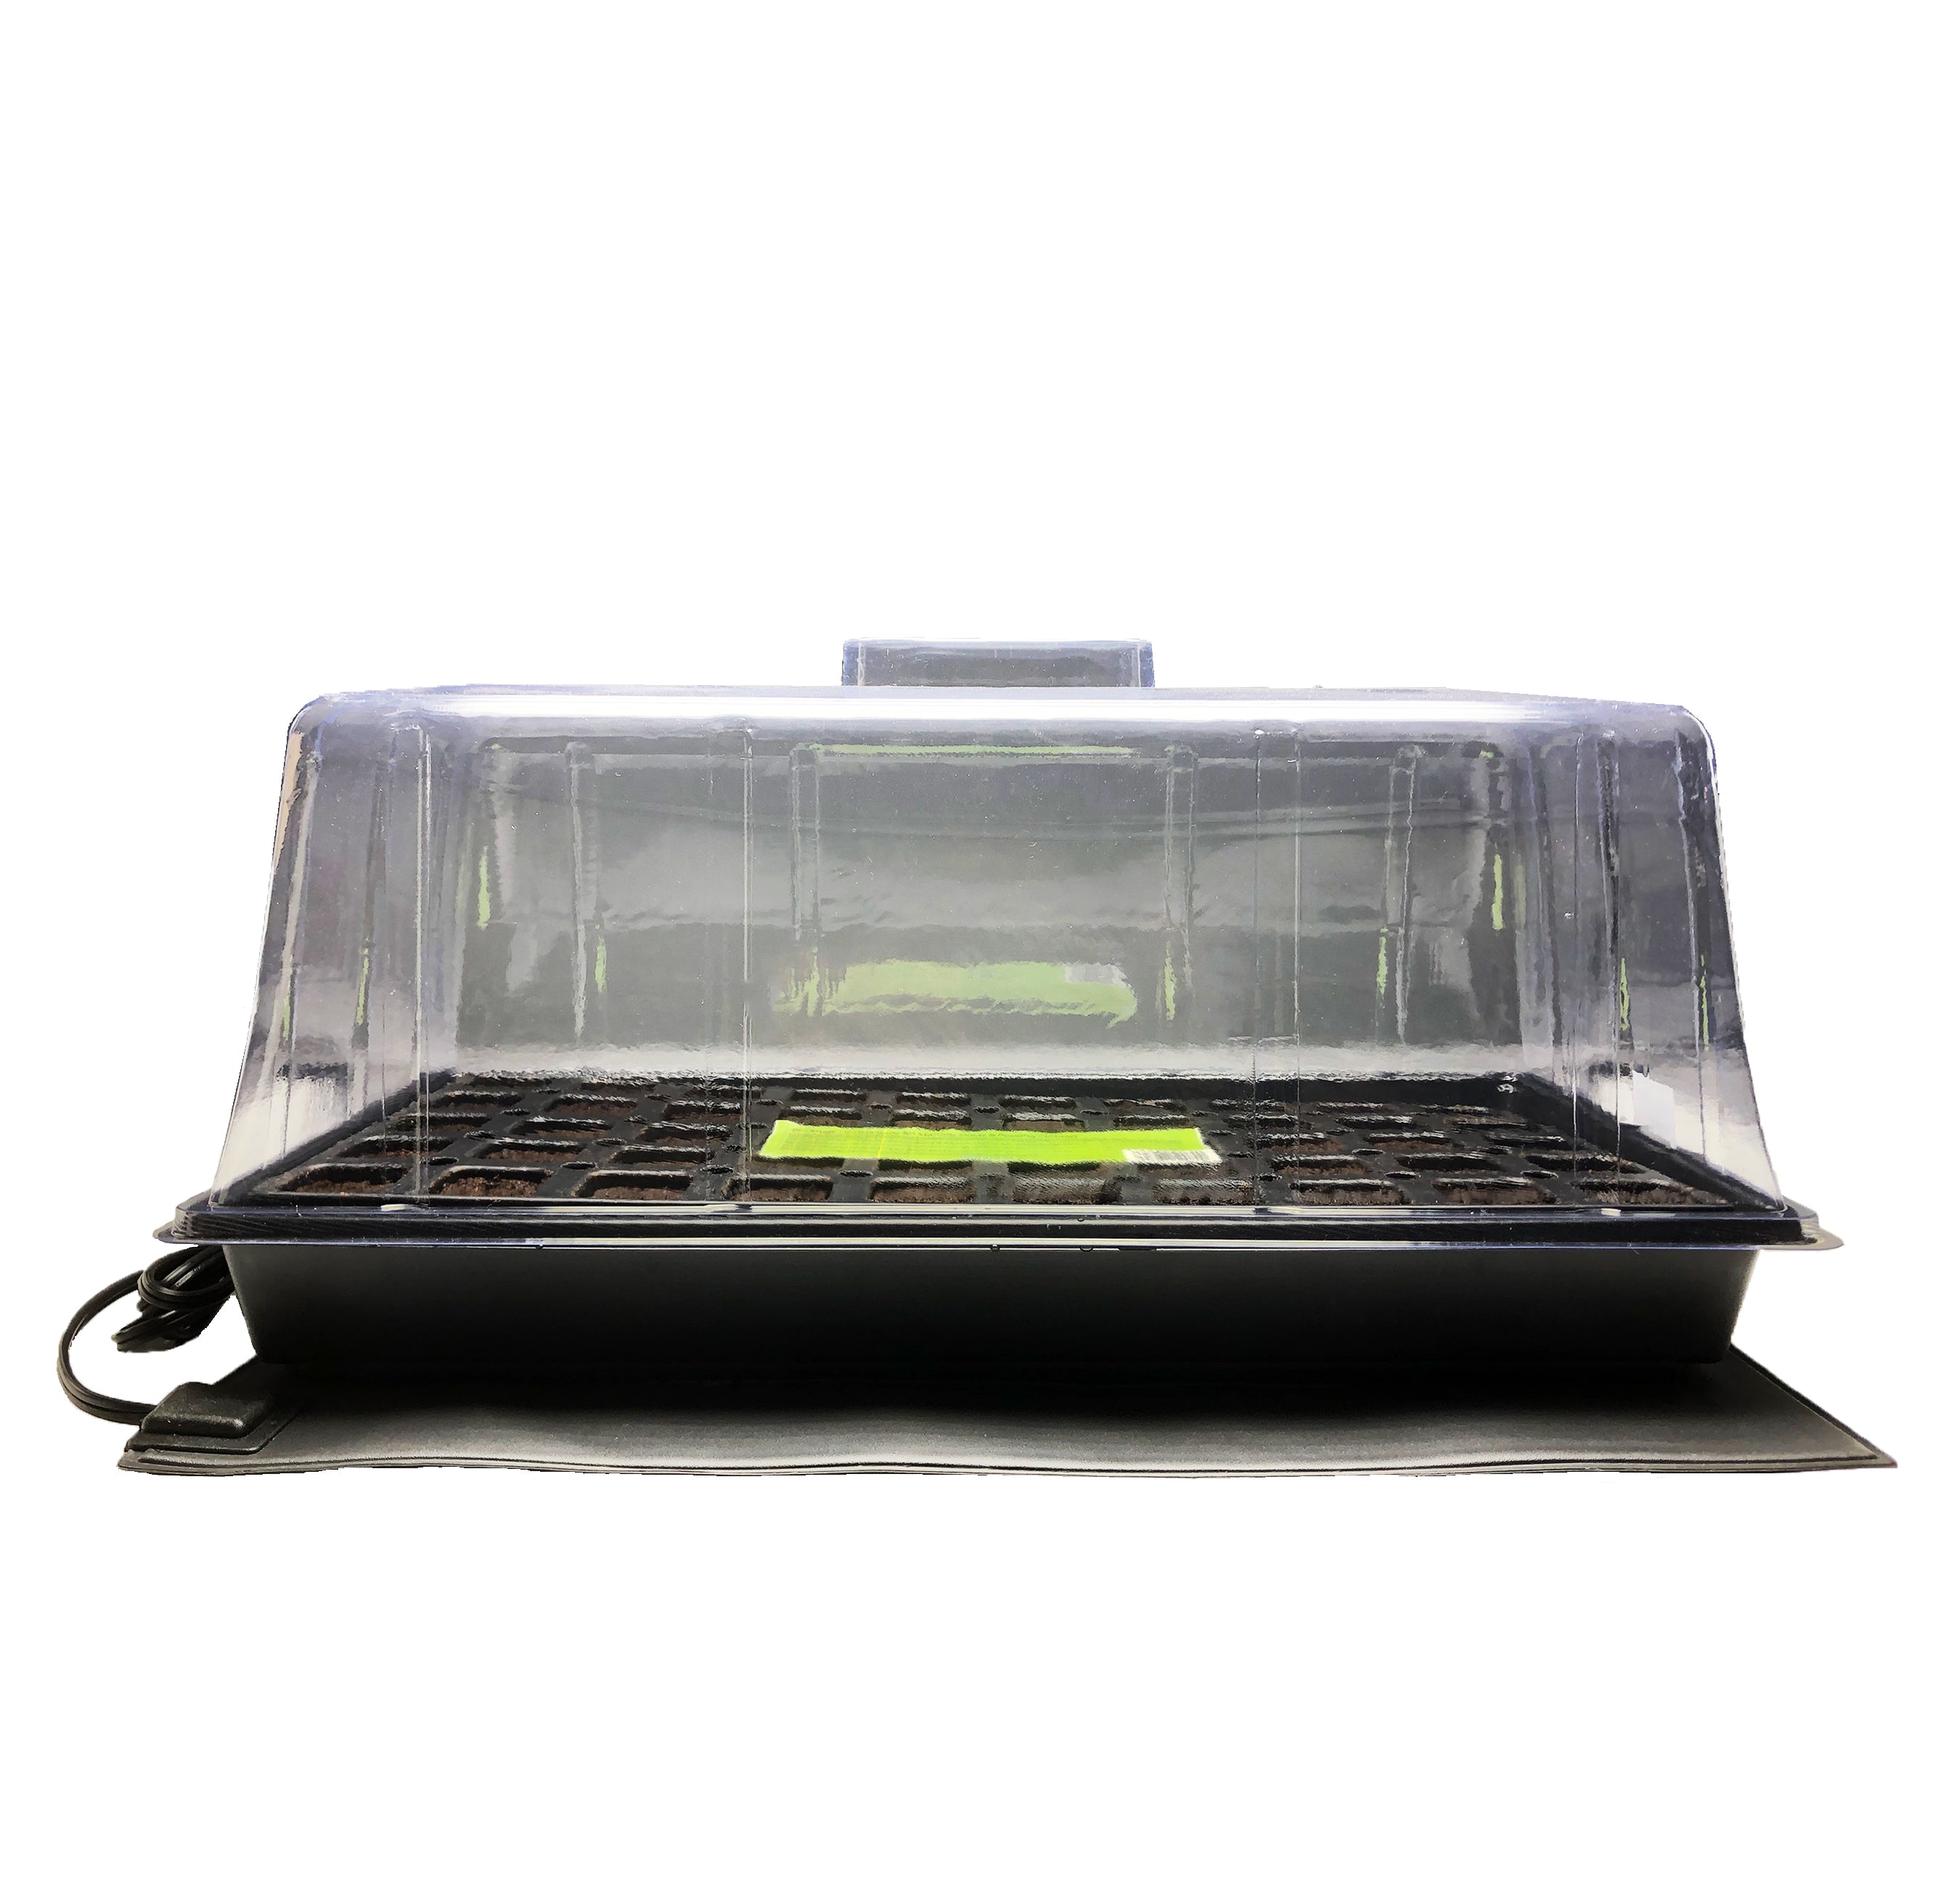 Viagrow 50 Site Pro Plugs with Tray, Insert, Tall Dome and Heat Mat